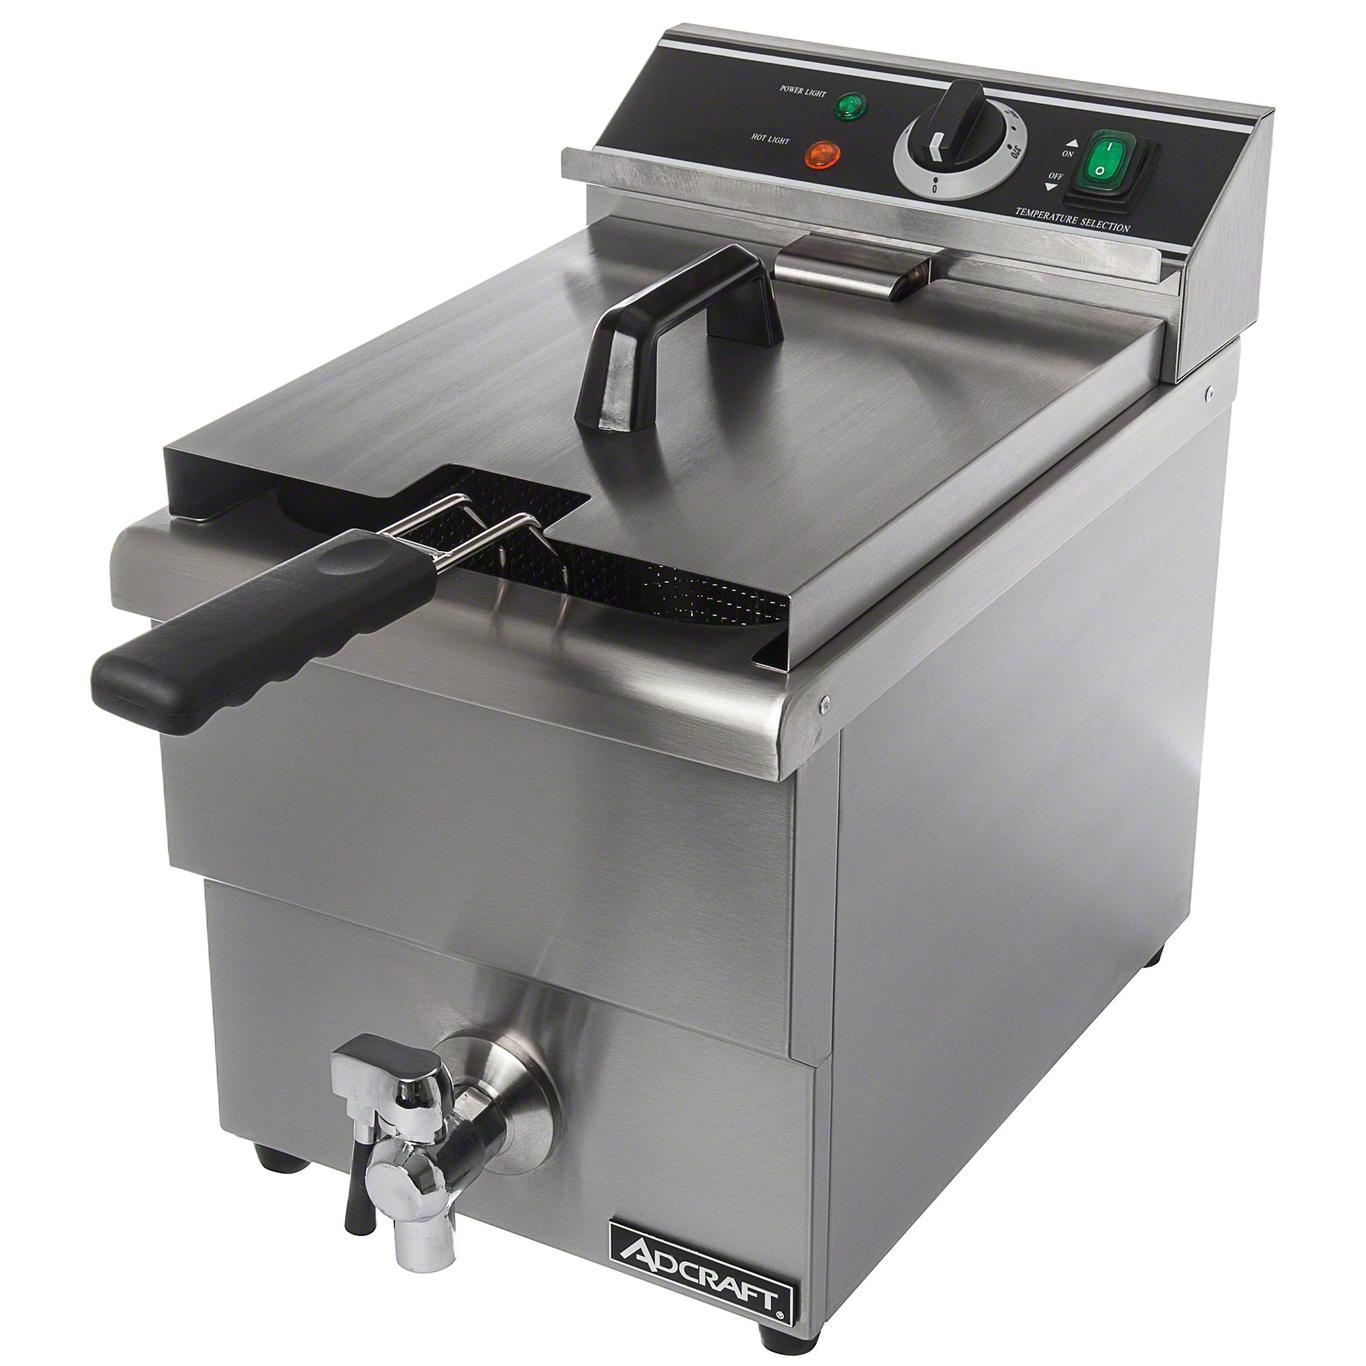 Isaac Slime amme Adcraft DF-12L 15lb Single Tank Electric Counter Top Deep Fryer w/ Faucet